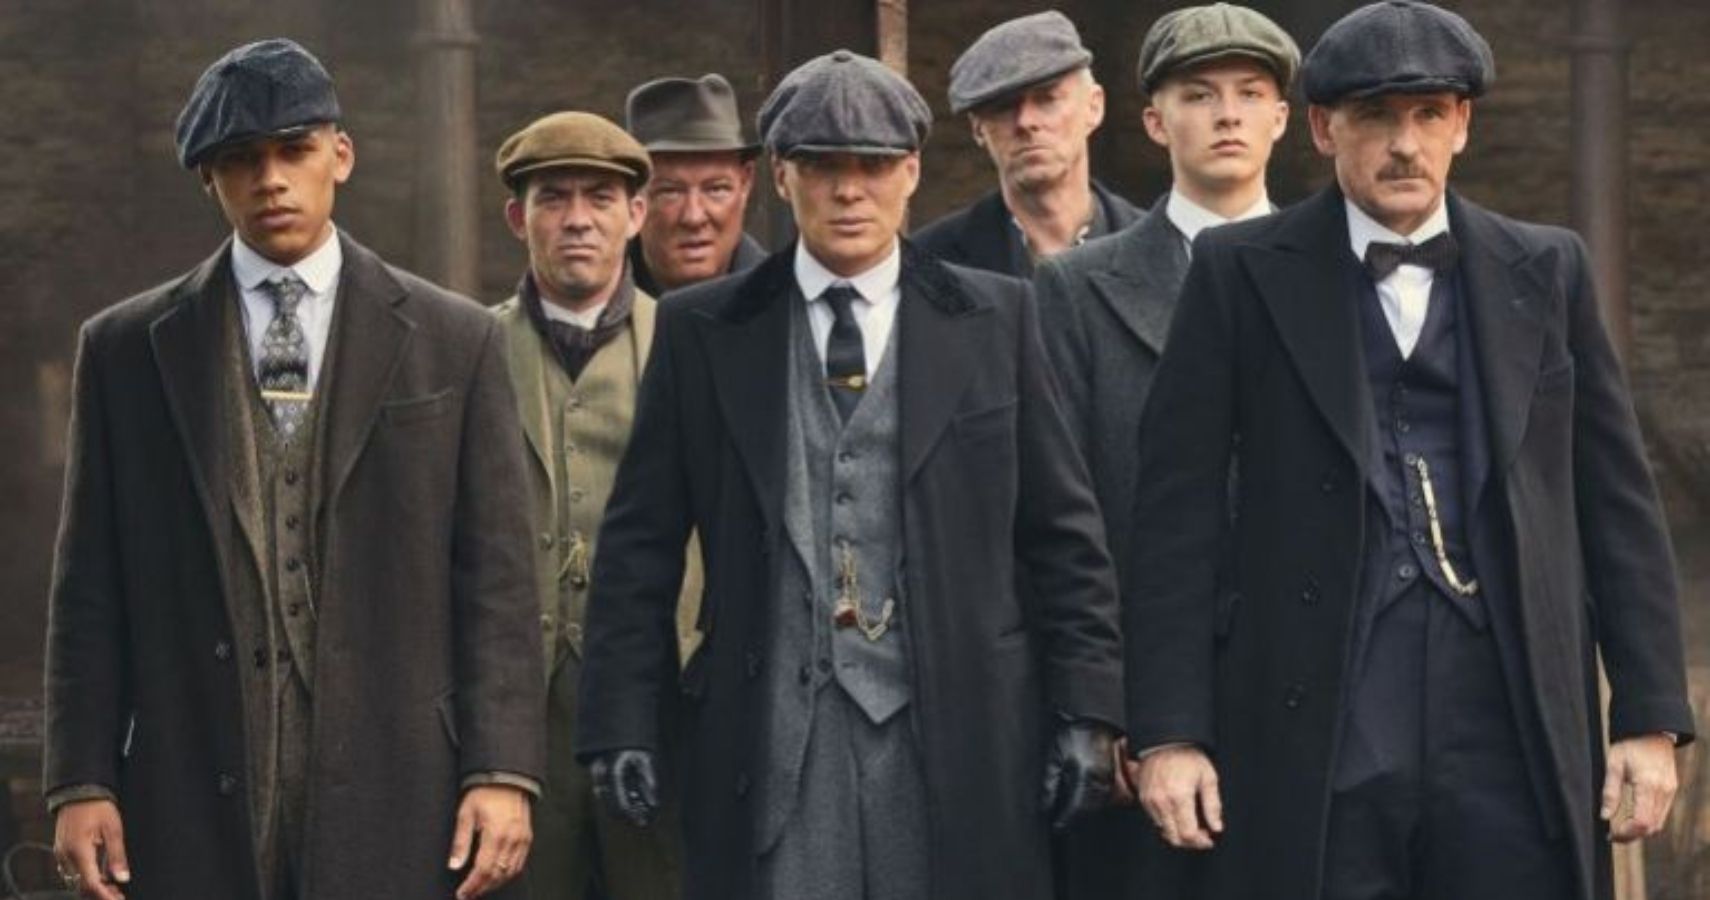 the whole peaky blinders gang together